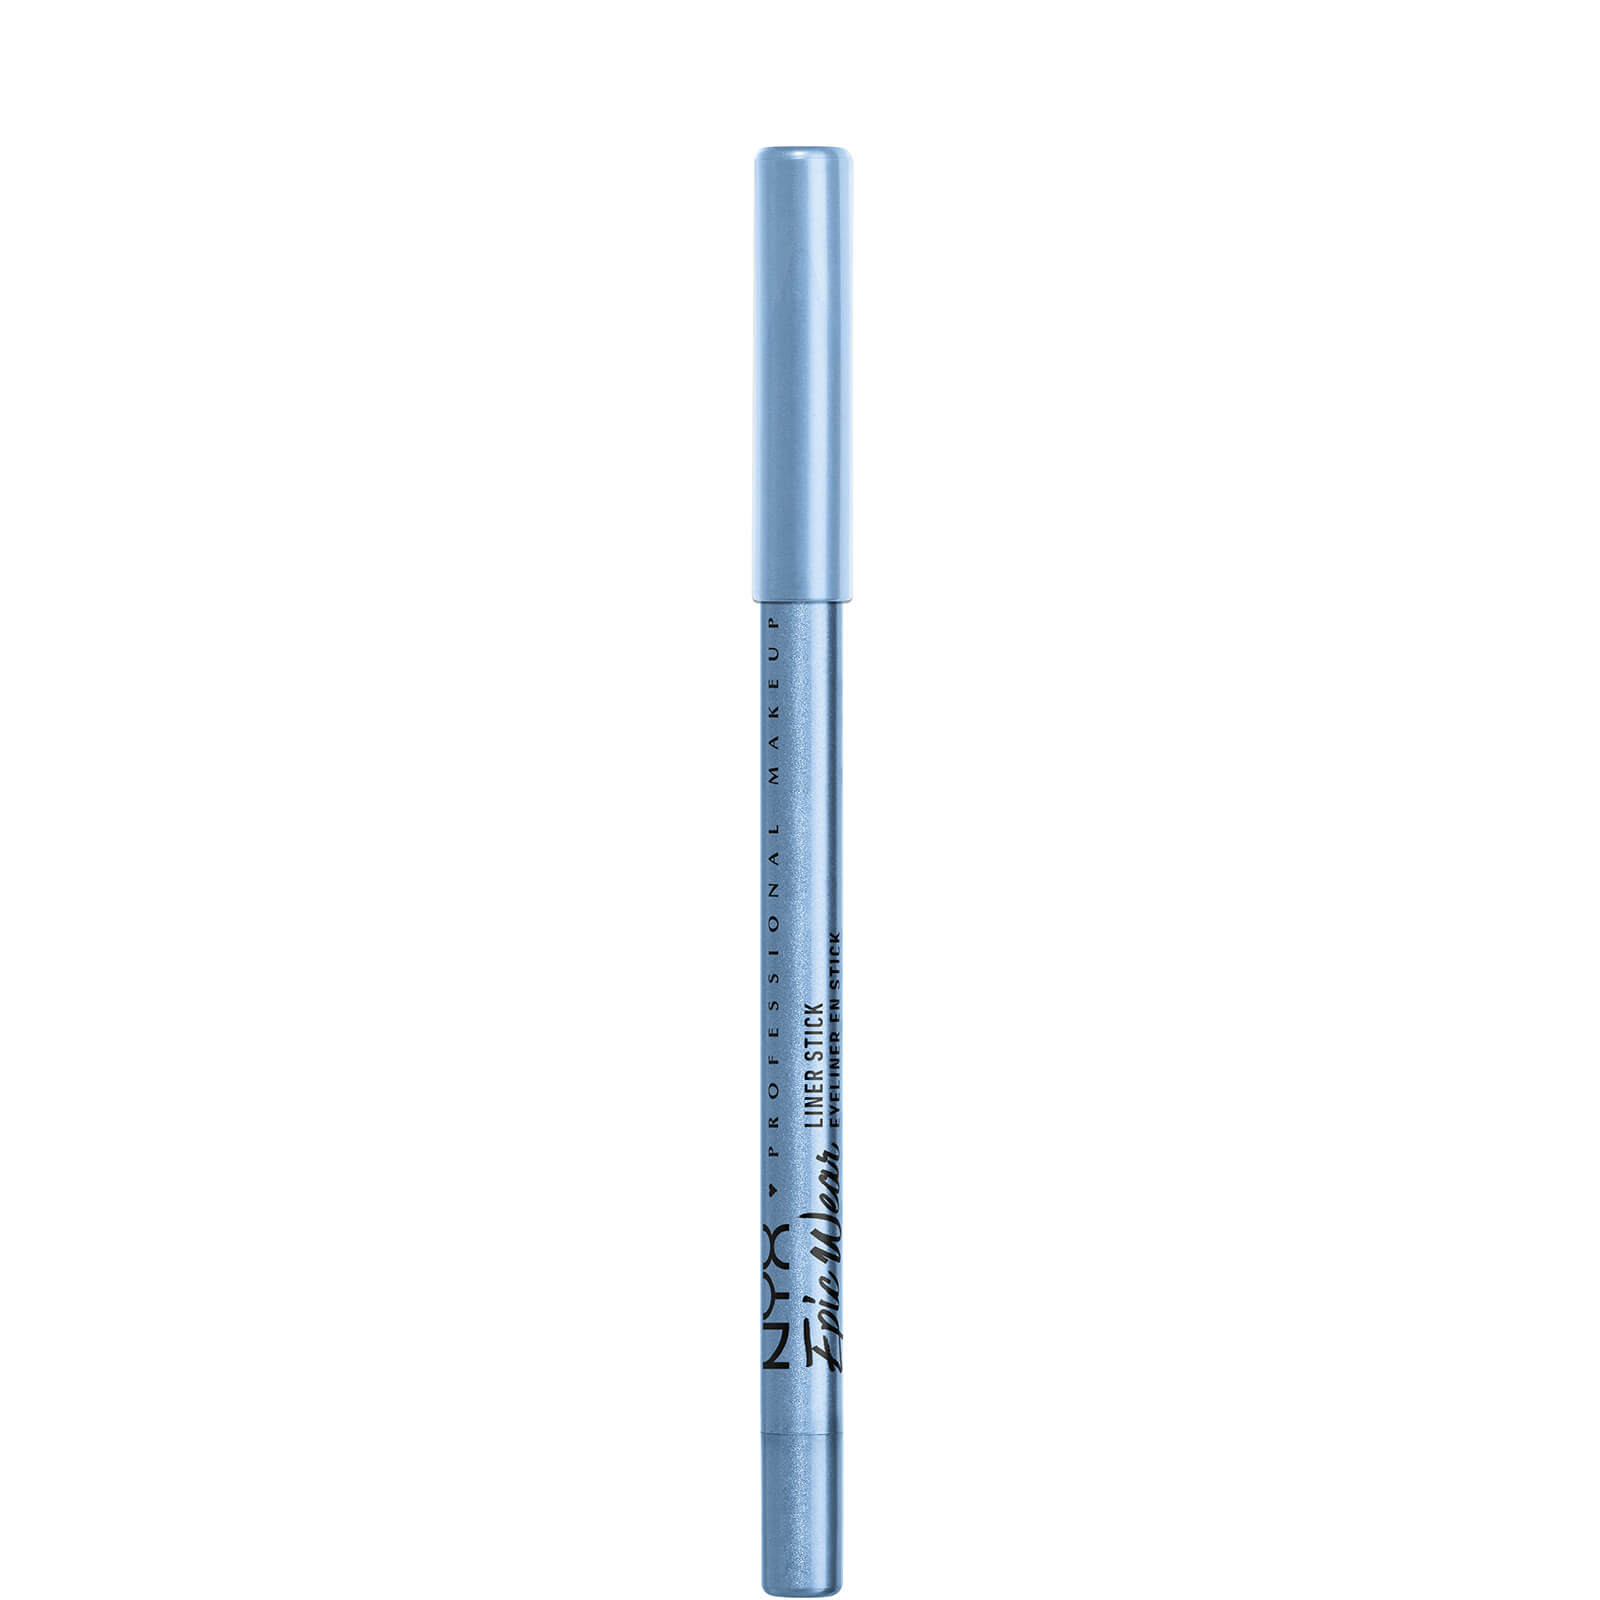 Image of NYX Professional Makeup Epic Wear Long Lasting Liner Stick 1.22g (Various Shades) - Chill Blue